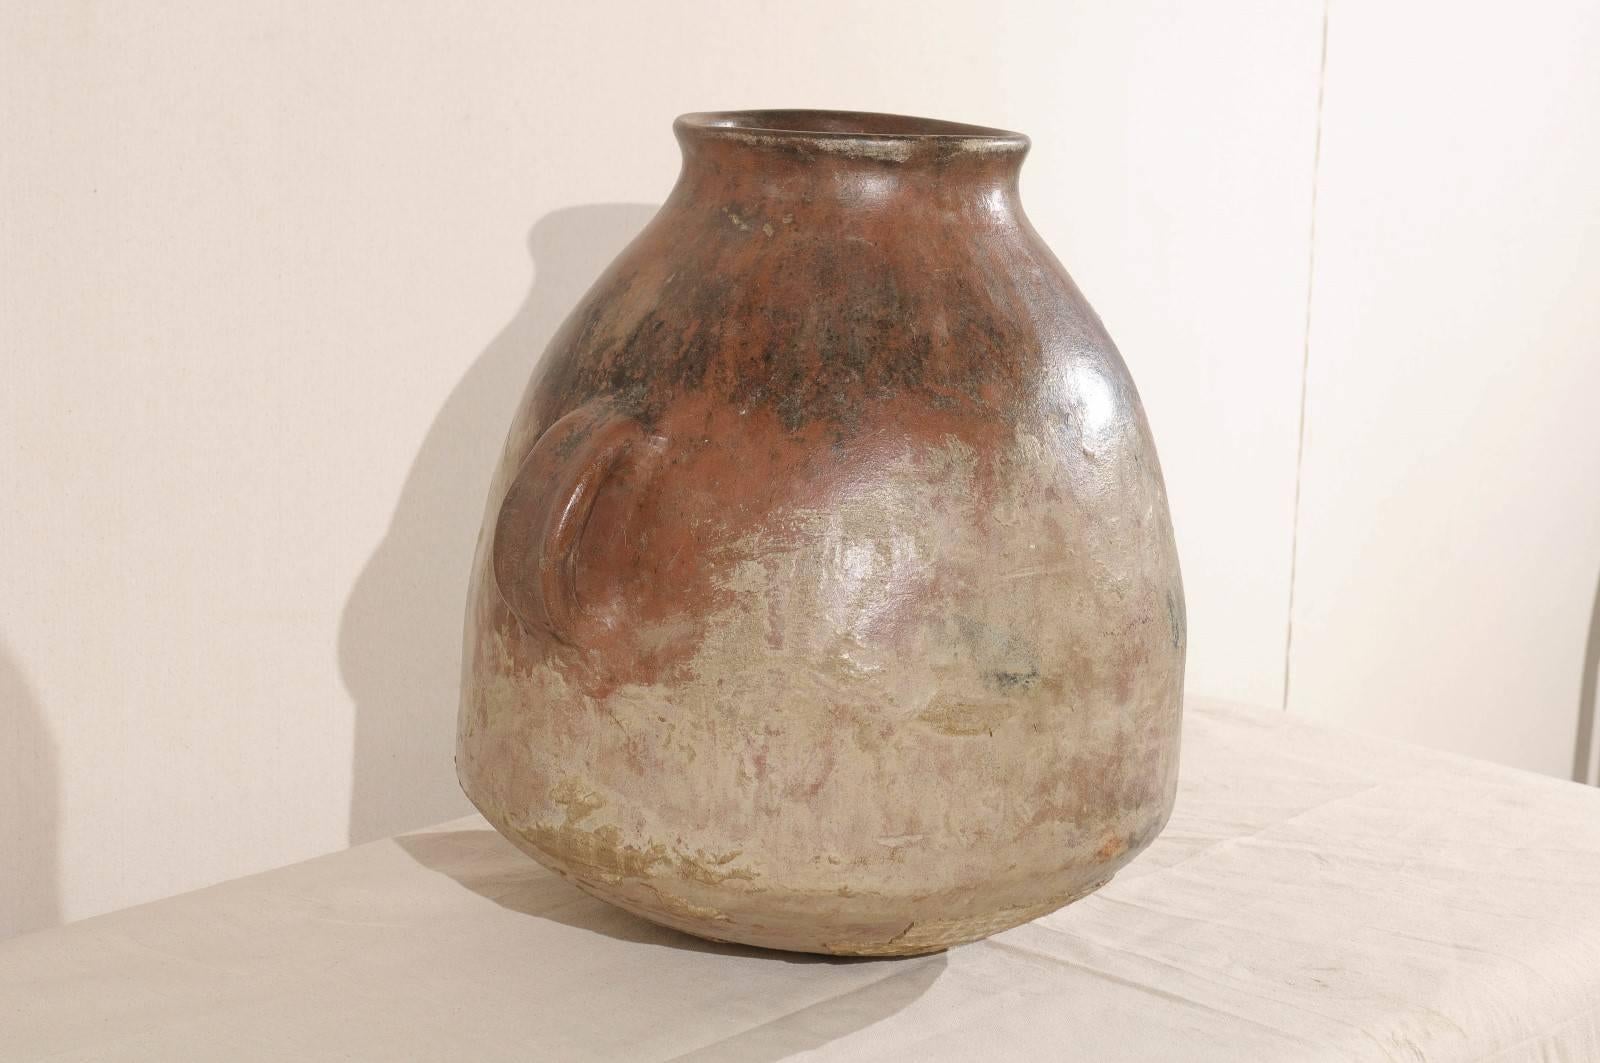 Guatemalan Mid-19th Century Spanish Colonial Jar with Two Handles, Made of Clay